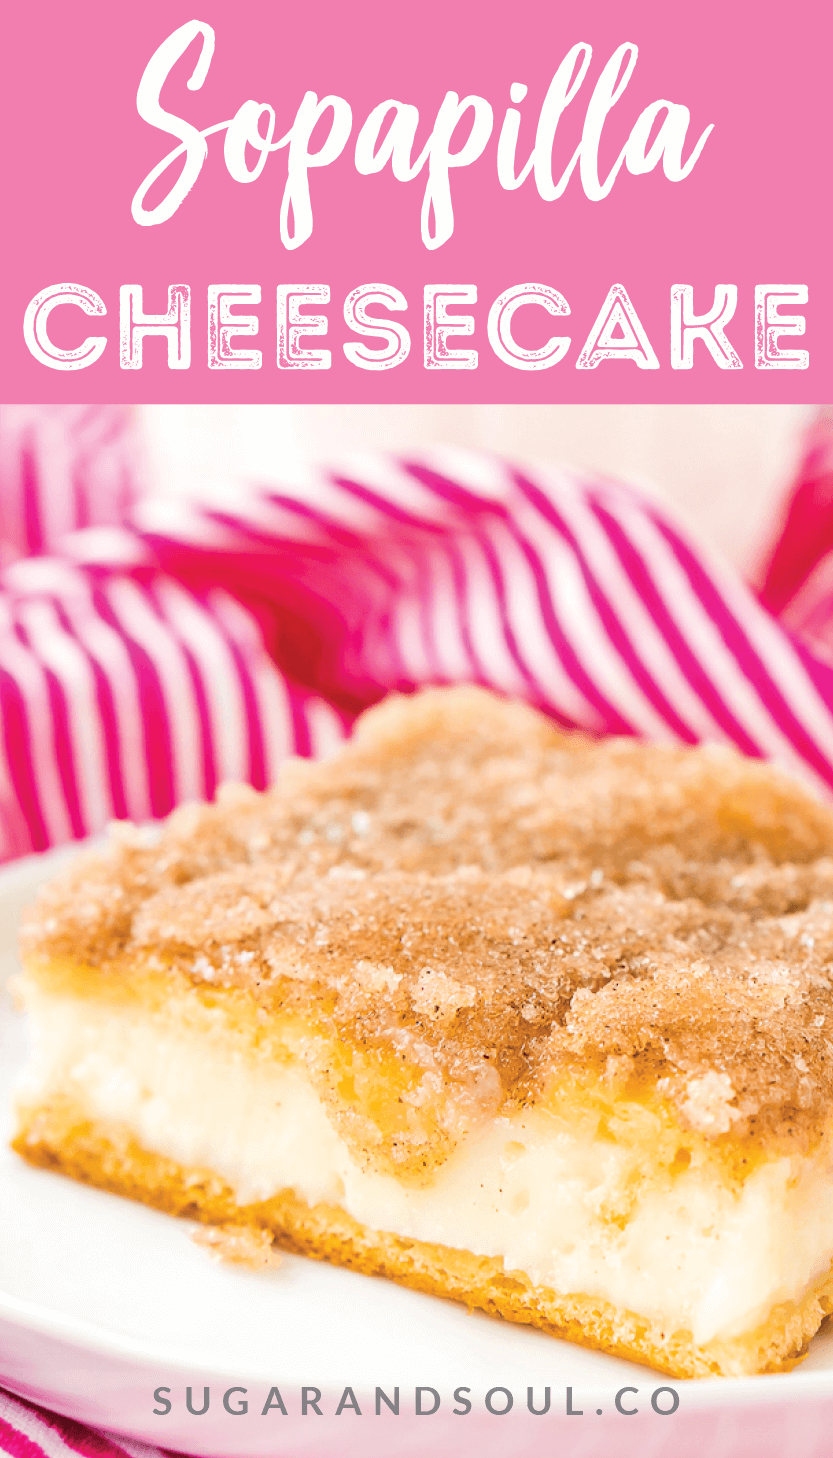 Sopapilla Cheesecake is a Spanish-inspired dessert made with crescent roll dough, cream cheese, cinnamon, sugar, butter, and a drizzle of honey.